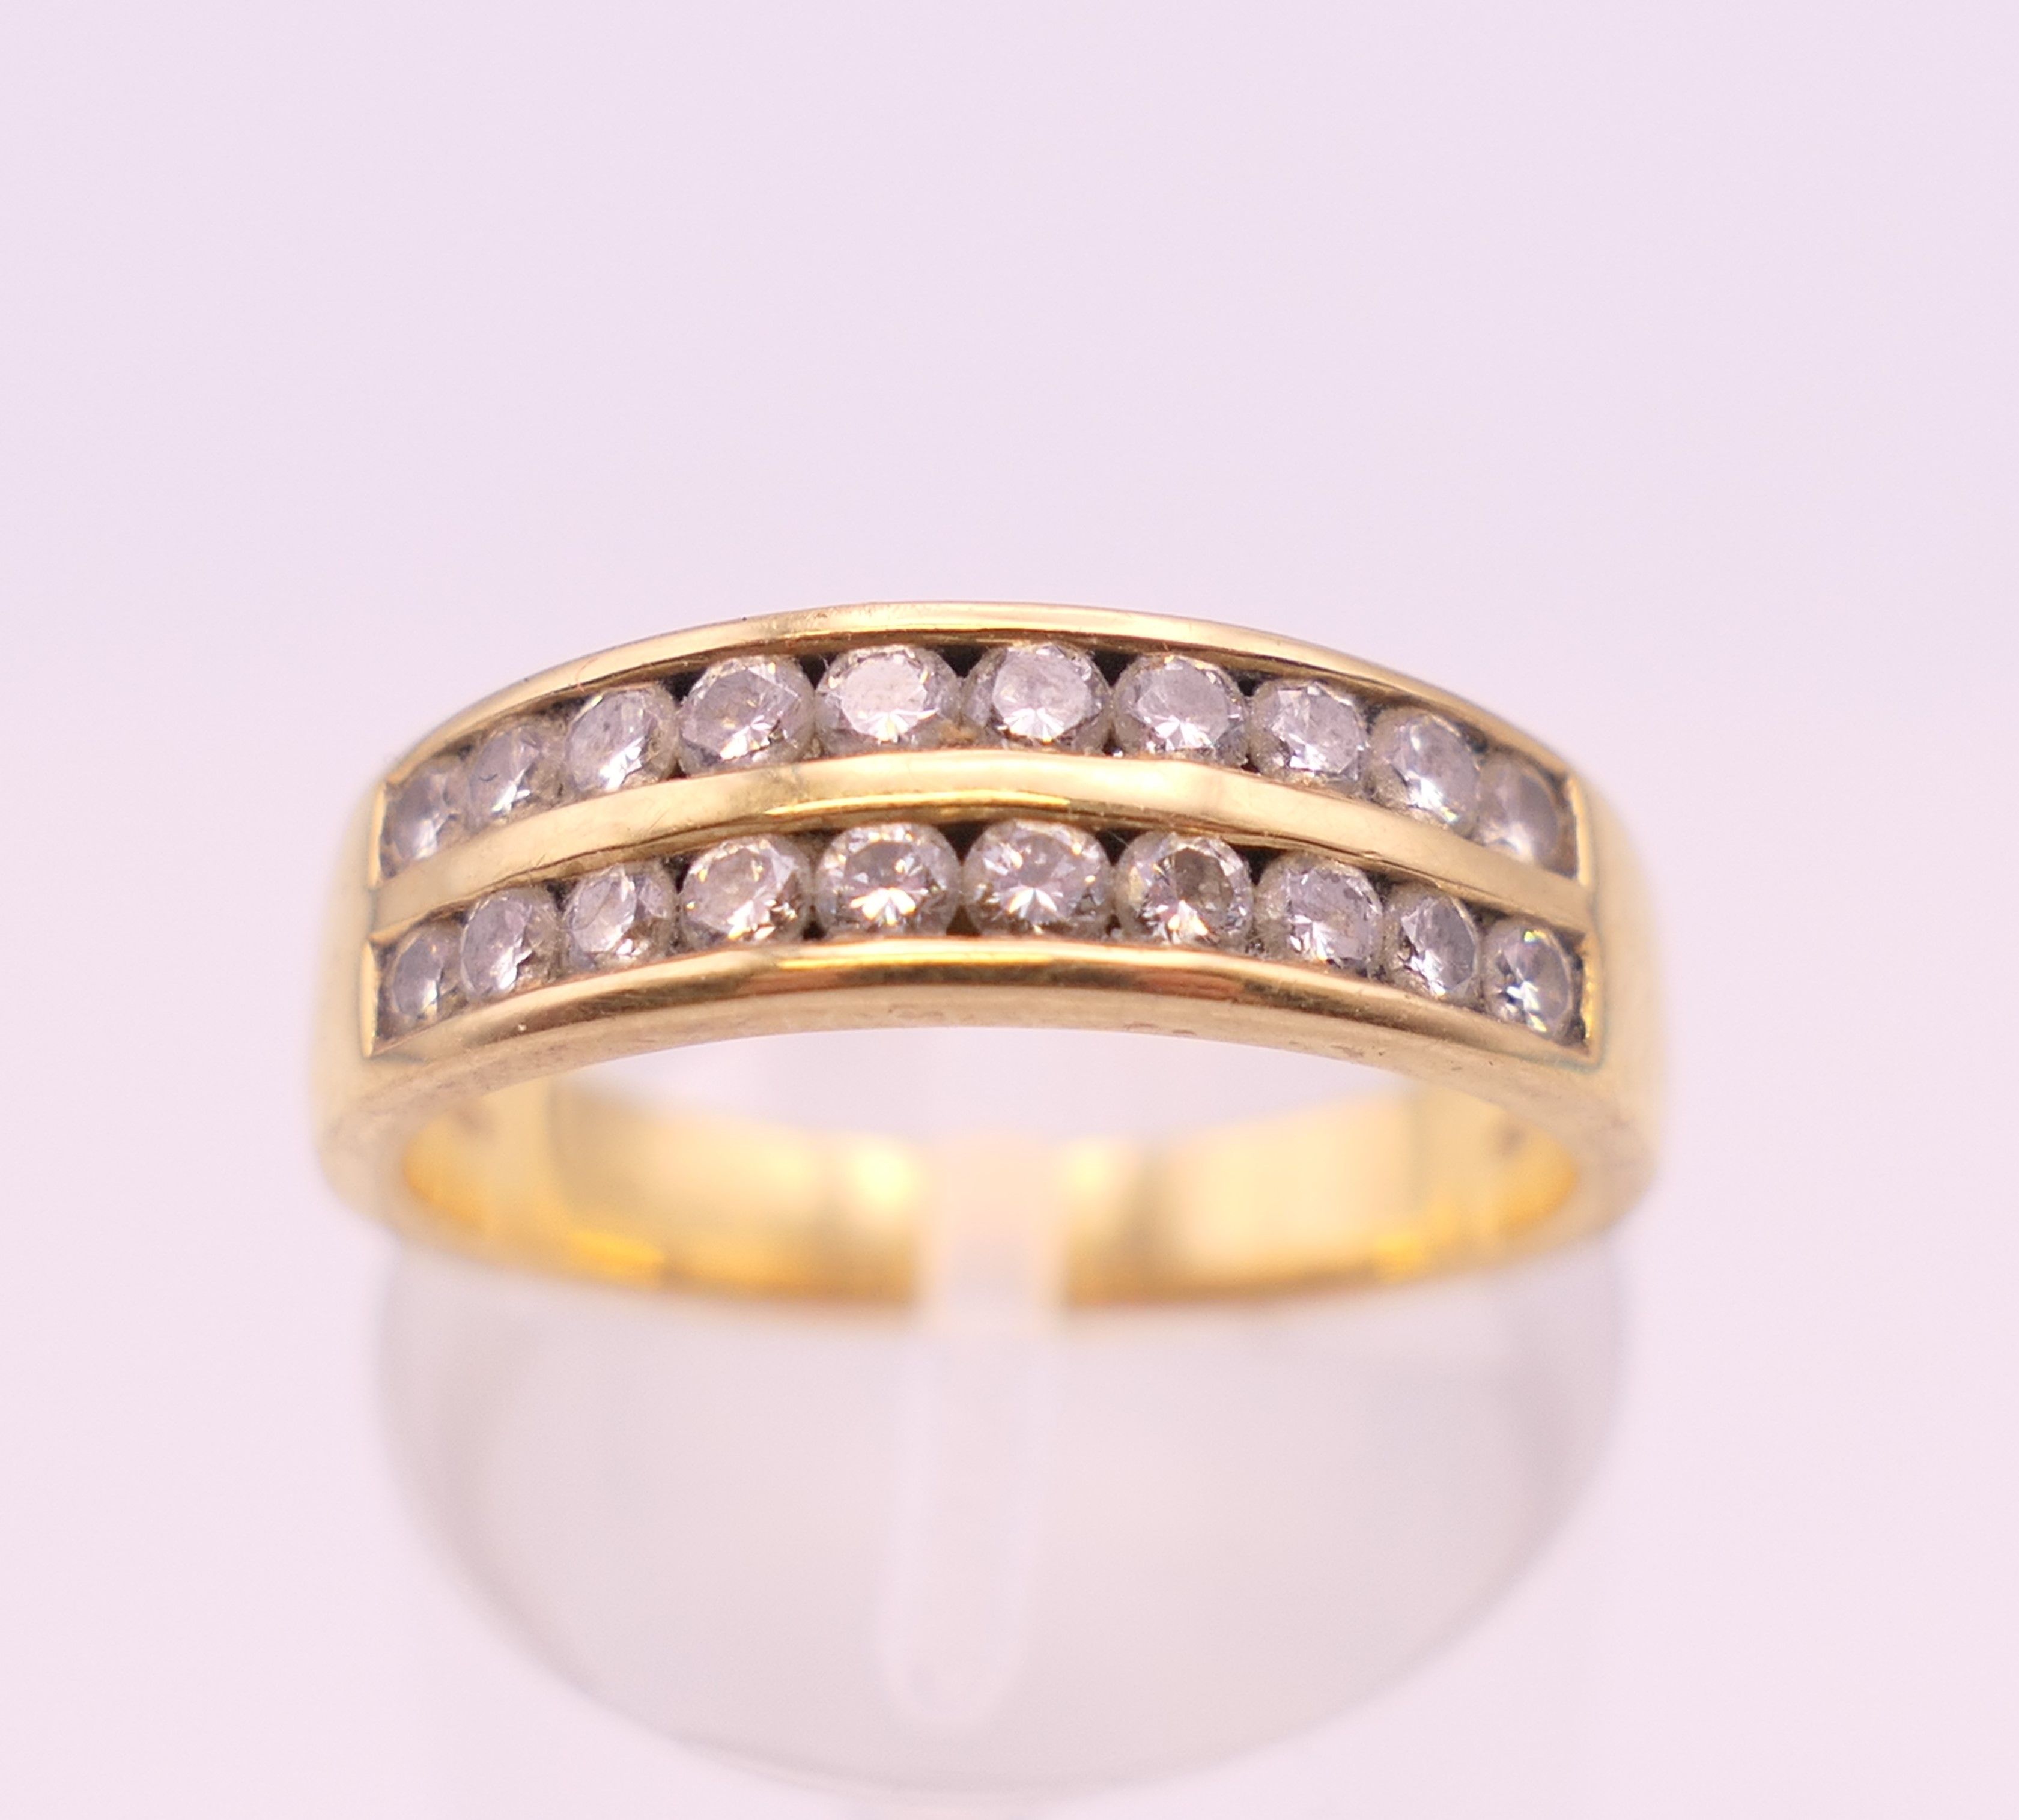 An 18 ct gold diamond ring. Ring size M. 4.4 grammes total weight.